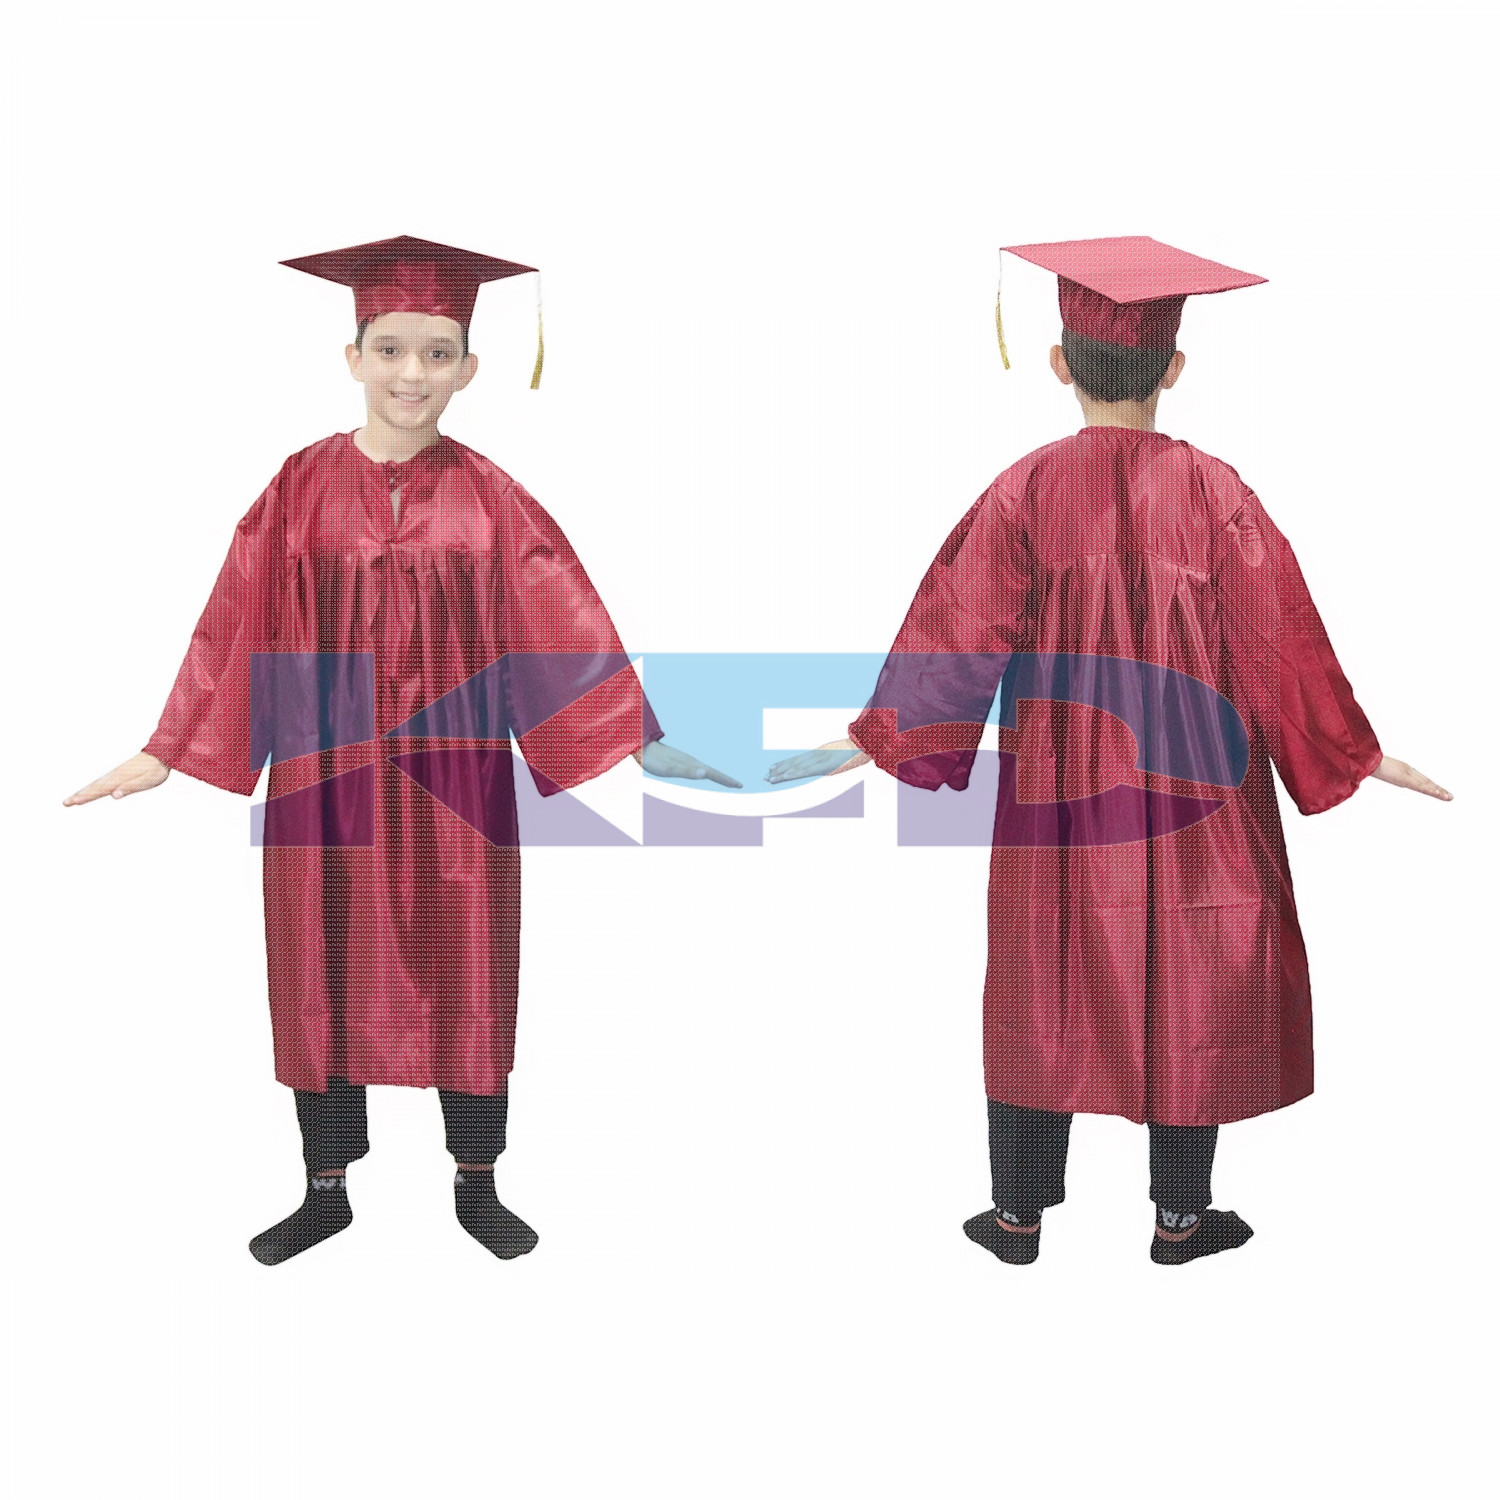 Graduation Gown Meherun/Degree Gown Fancy Dress For Kids,Costume For Convocation/Annual Function/Theme Party/Competition/Stage Shows Dress